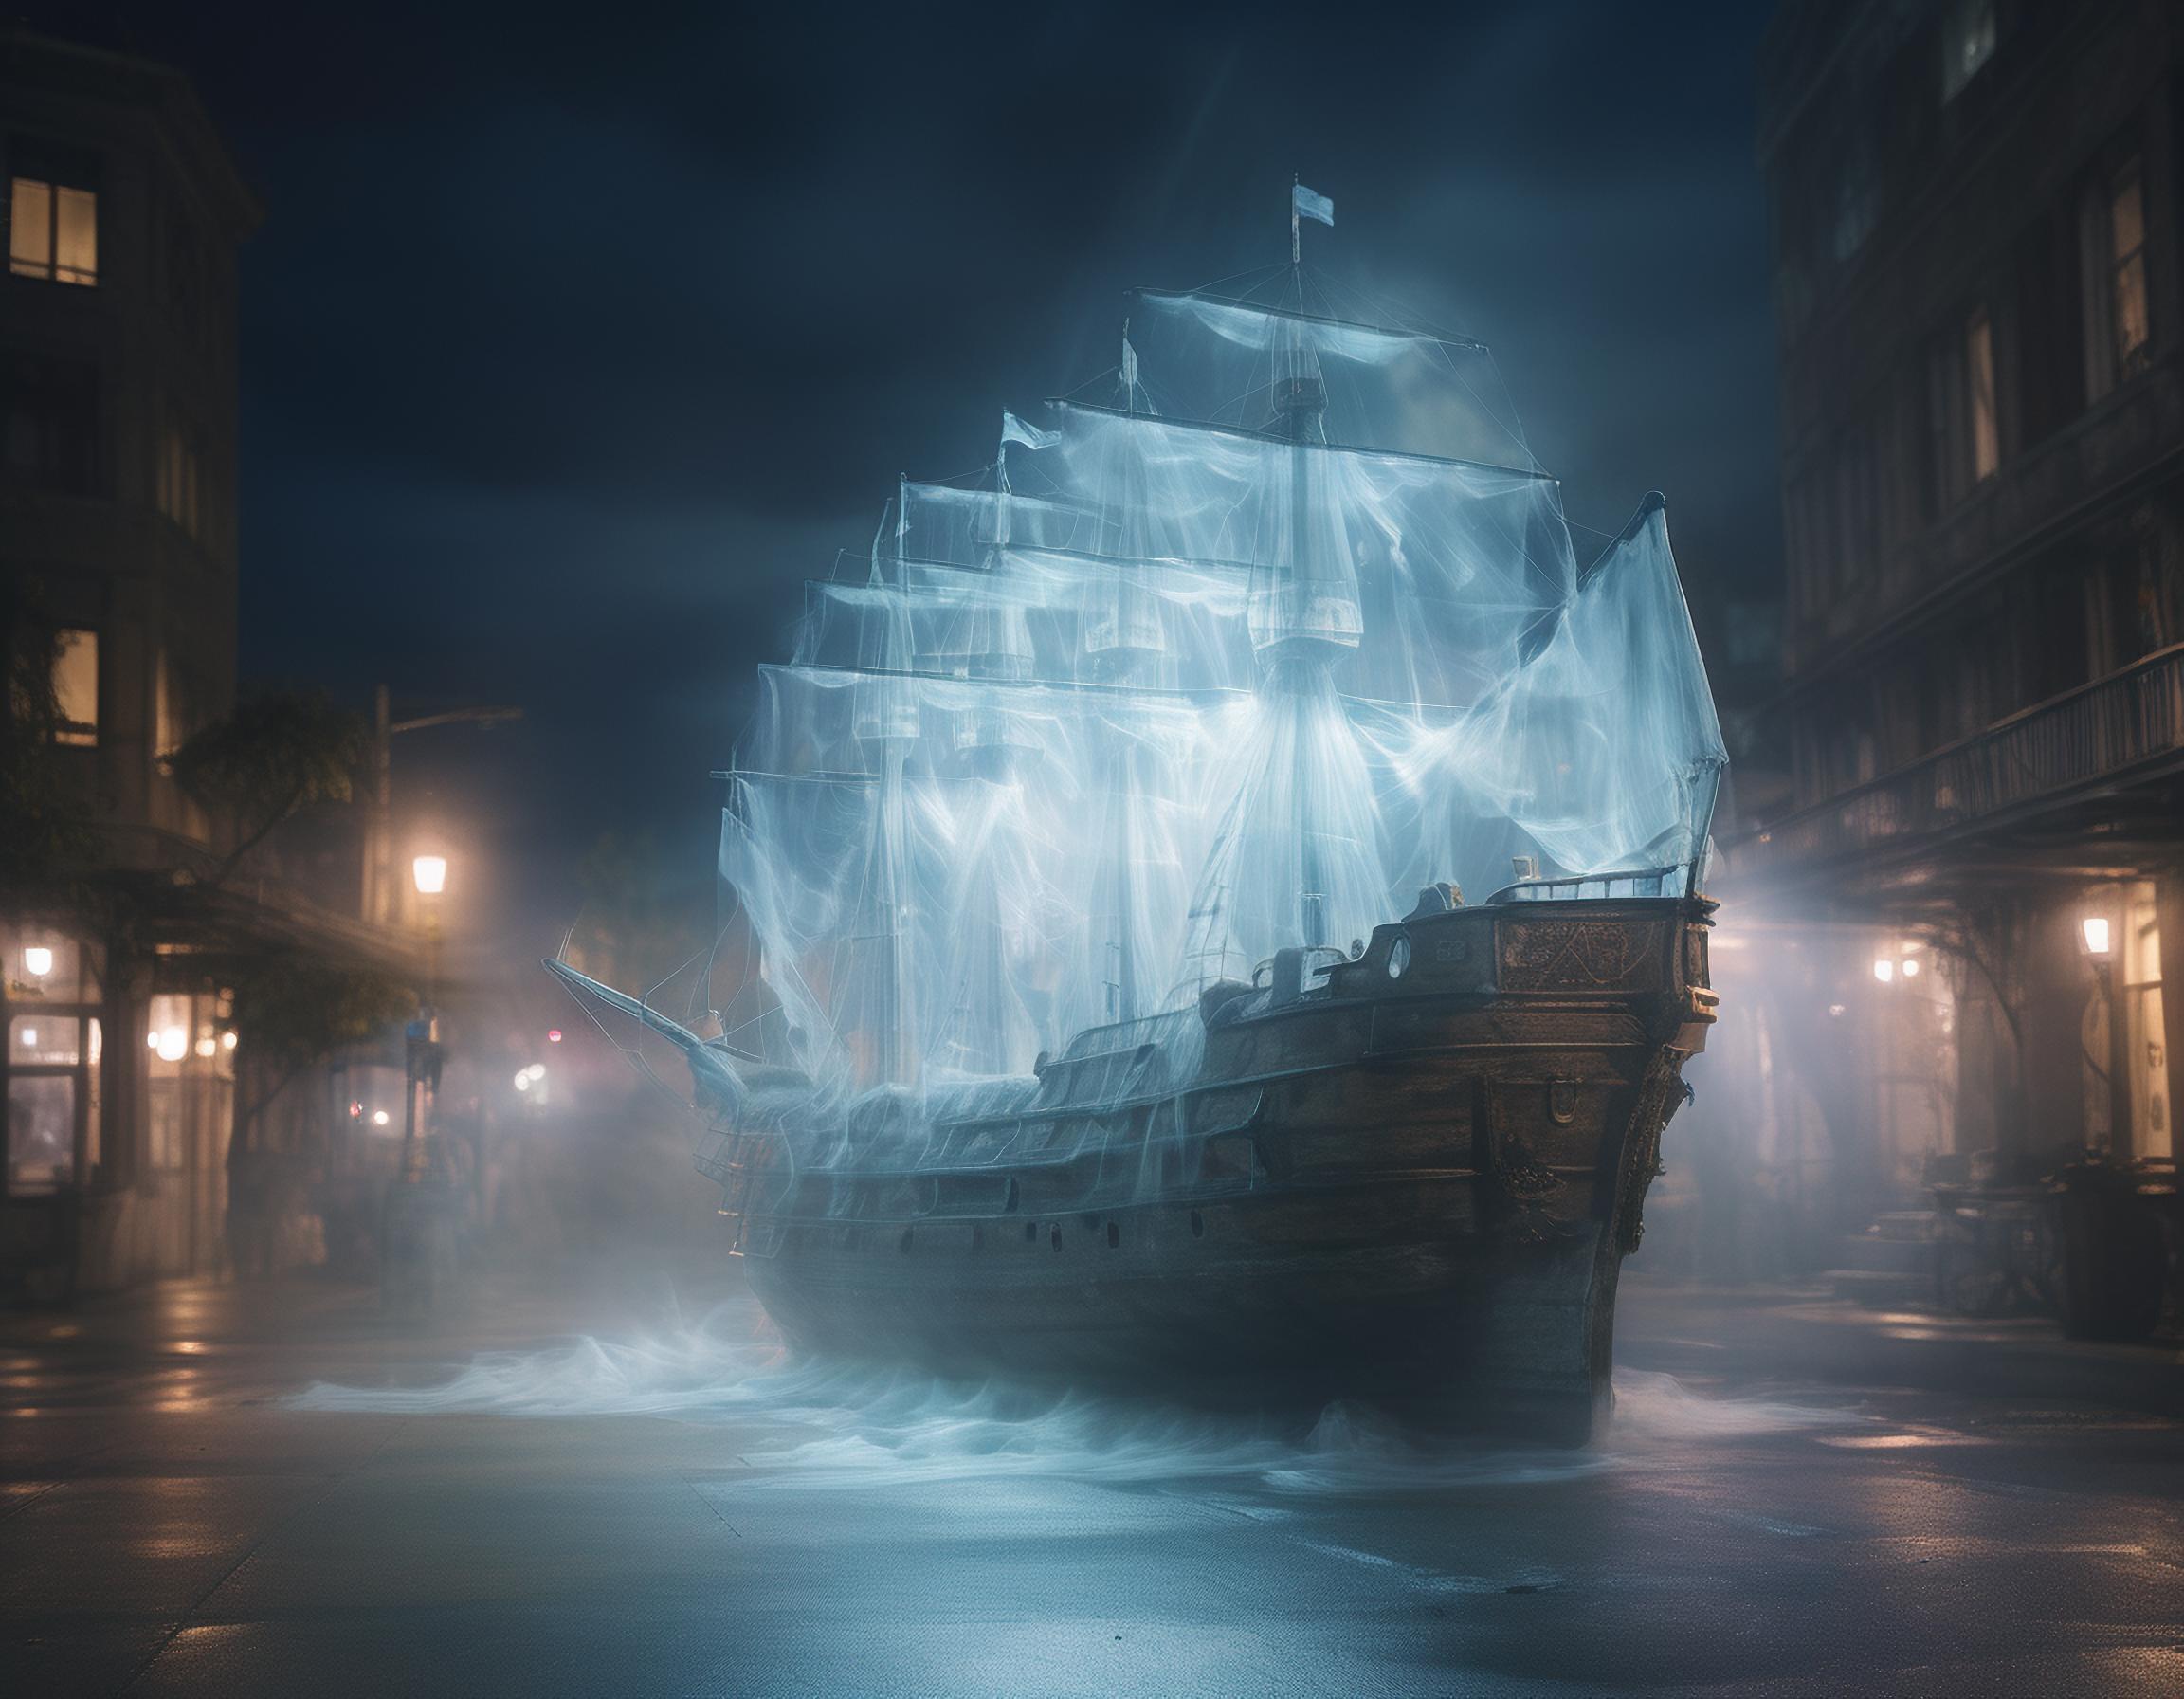 A hauntingly beautiful scene of a ghostly sailboat floating in a dark, stormy night on a city street.